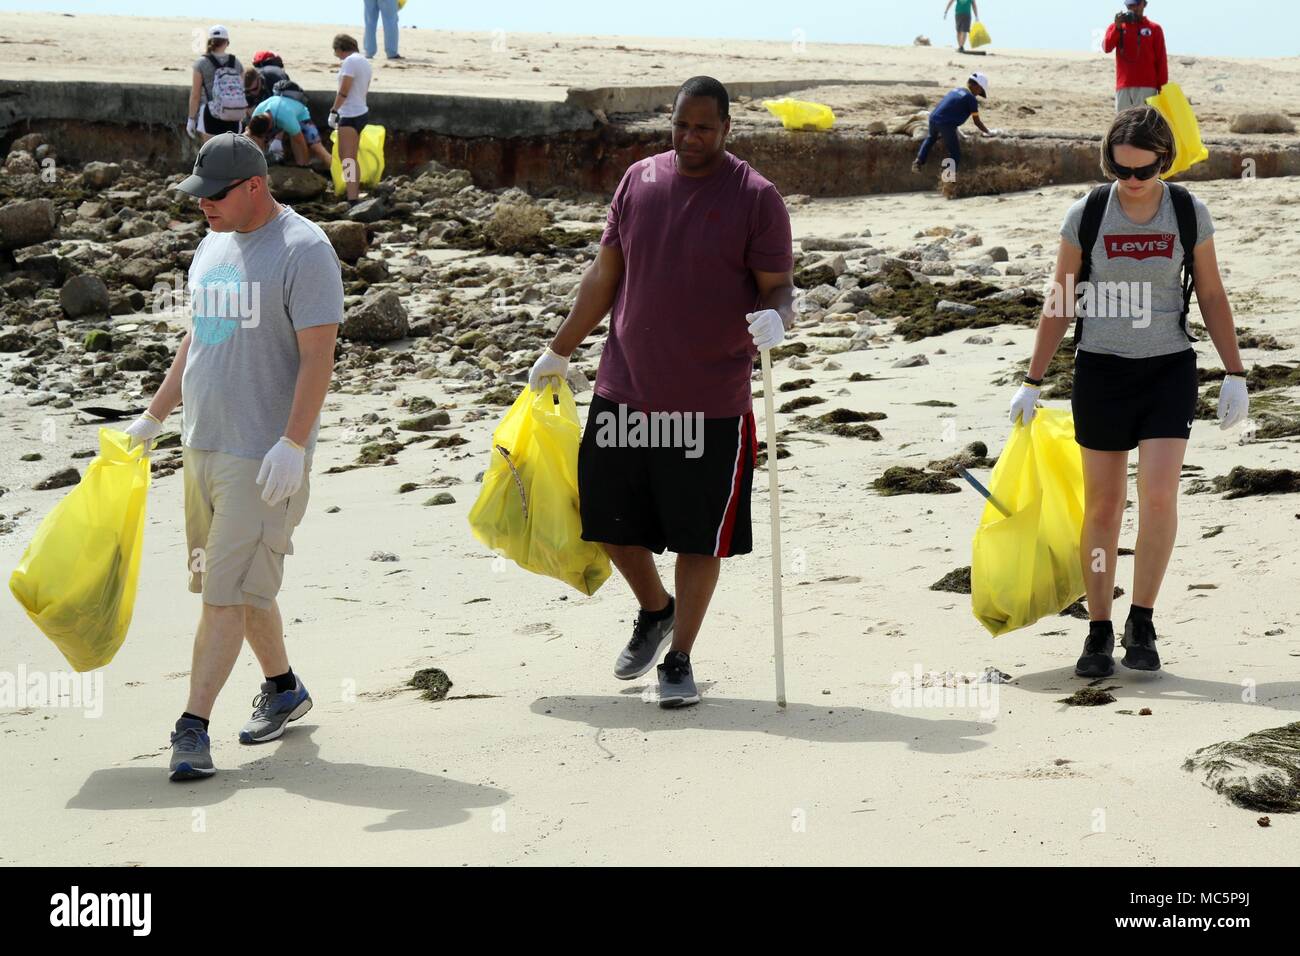 KUWAIT CITY, Kuwait — Sgt. Cameron Wiebelhaus (left) of Erie, Sgt. Raymond Parrish of Pittsburgh and Spc. Brooke King of Reedsville, Pa., clear a section of Anjafa Beach of trash during a cleanup event April 7, 2018. King is with Headquarters Support Company, Headquarters and Headquarters Battalion, 28th Infantry Division, Task Force Spartan. Parrish and Wiebelhaus are with Charlie Company. The Saturday morning cleanup was part of the Every Soldier an Ambassador (ESA) program and provided a morale-boosting trip that took Soldiers off post and into the local community for a common cause.  (U.S. Stock Photo